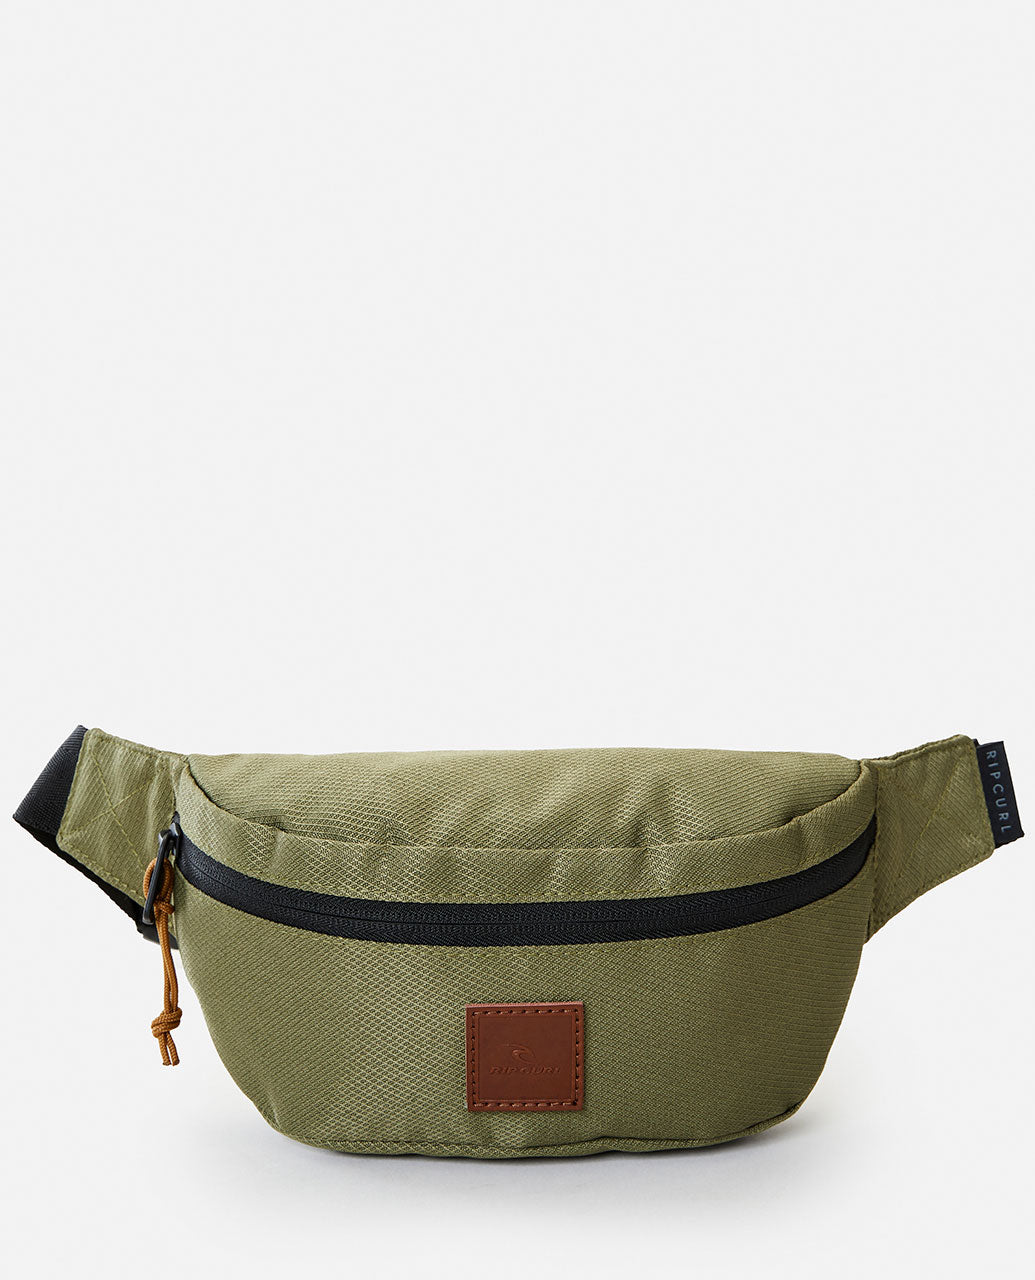 Overland Small Waist Bag - Surf Equipment for mens – Rip Curl Indonesia